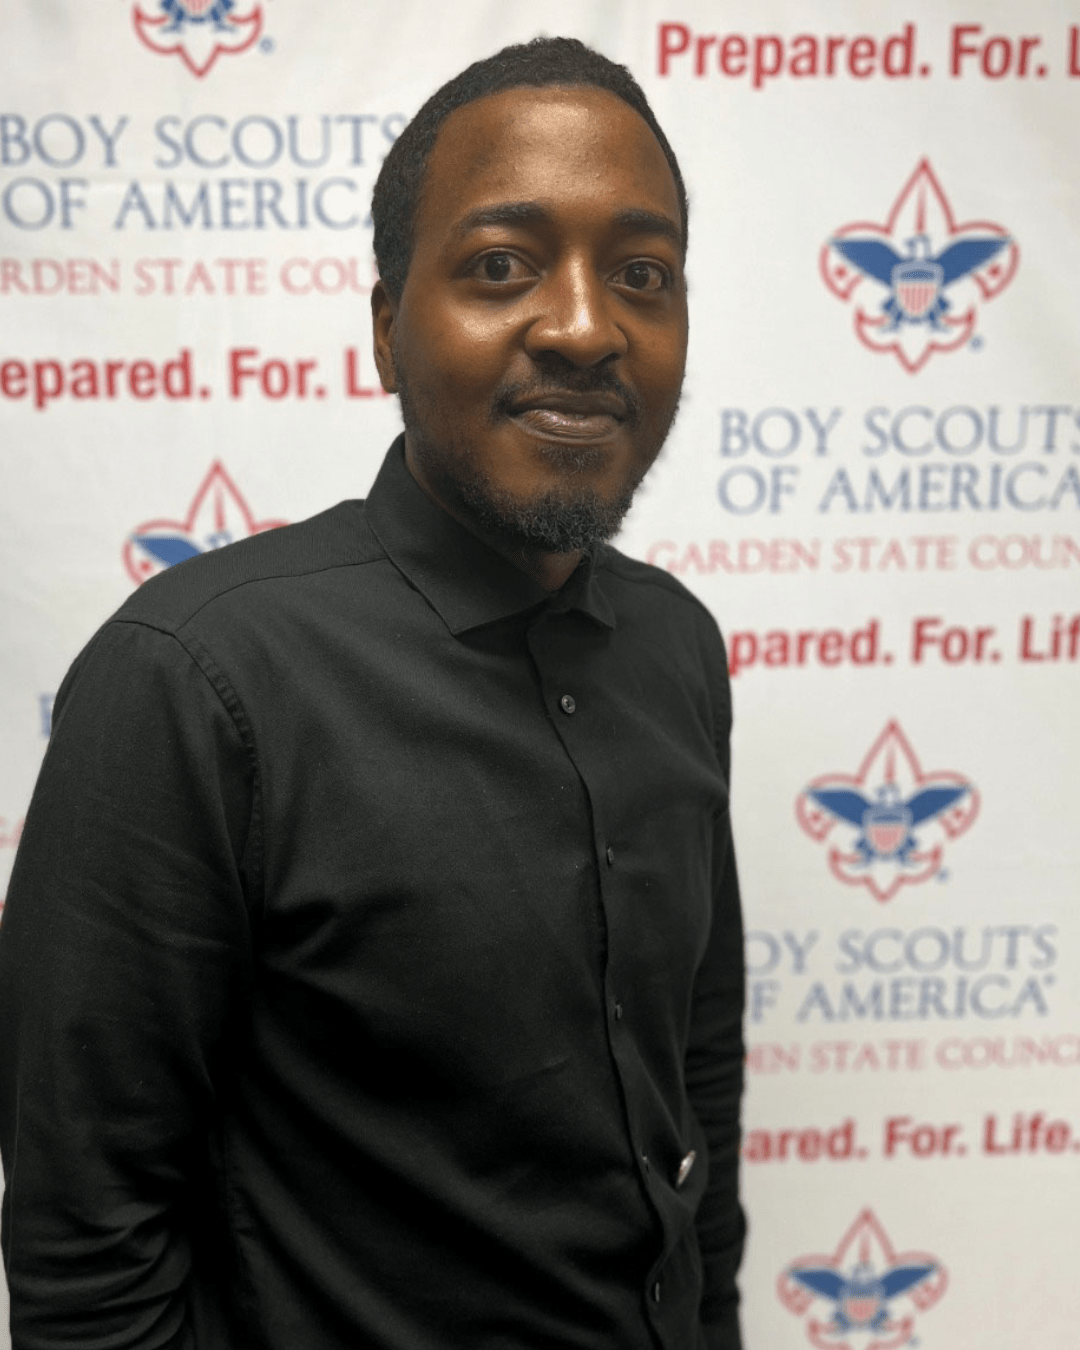 Maurice Bullock is a young man with dark brown skin wearing a black shirt. He stands with a warm, confident expression in front of a white background with repeating blue and red logos for the Boy Scouts of America Garden State Council